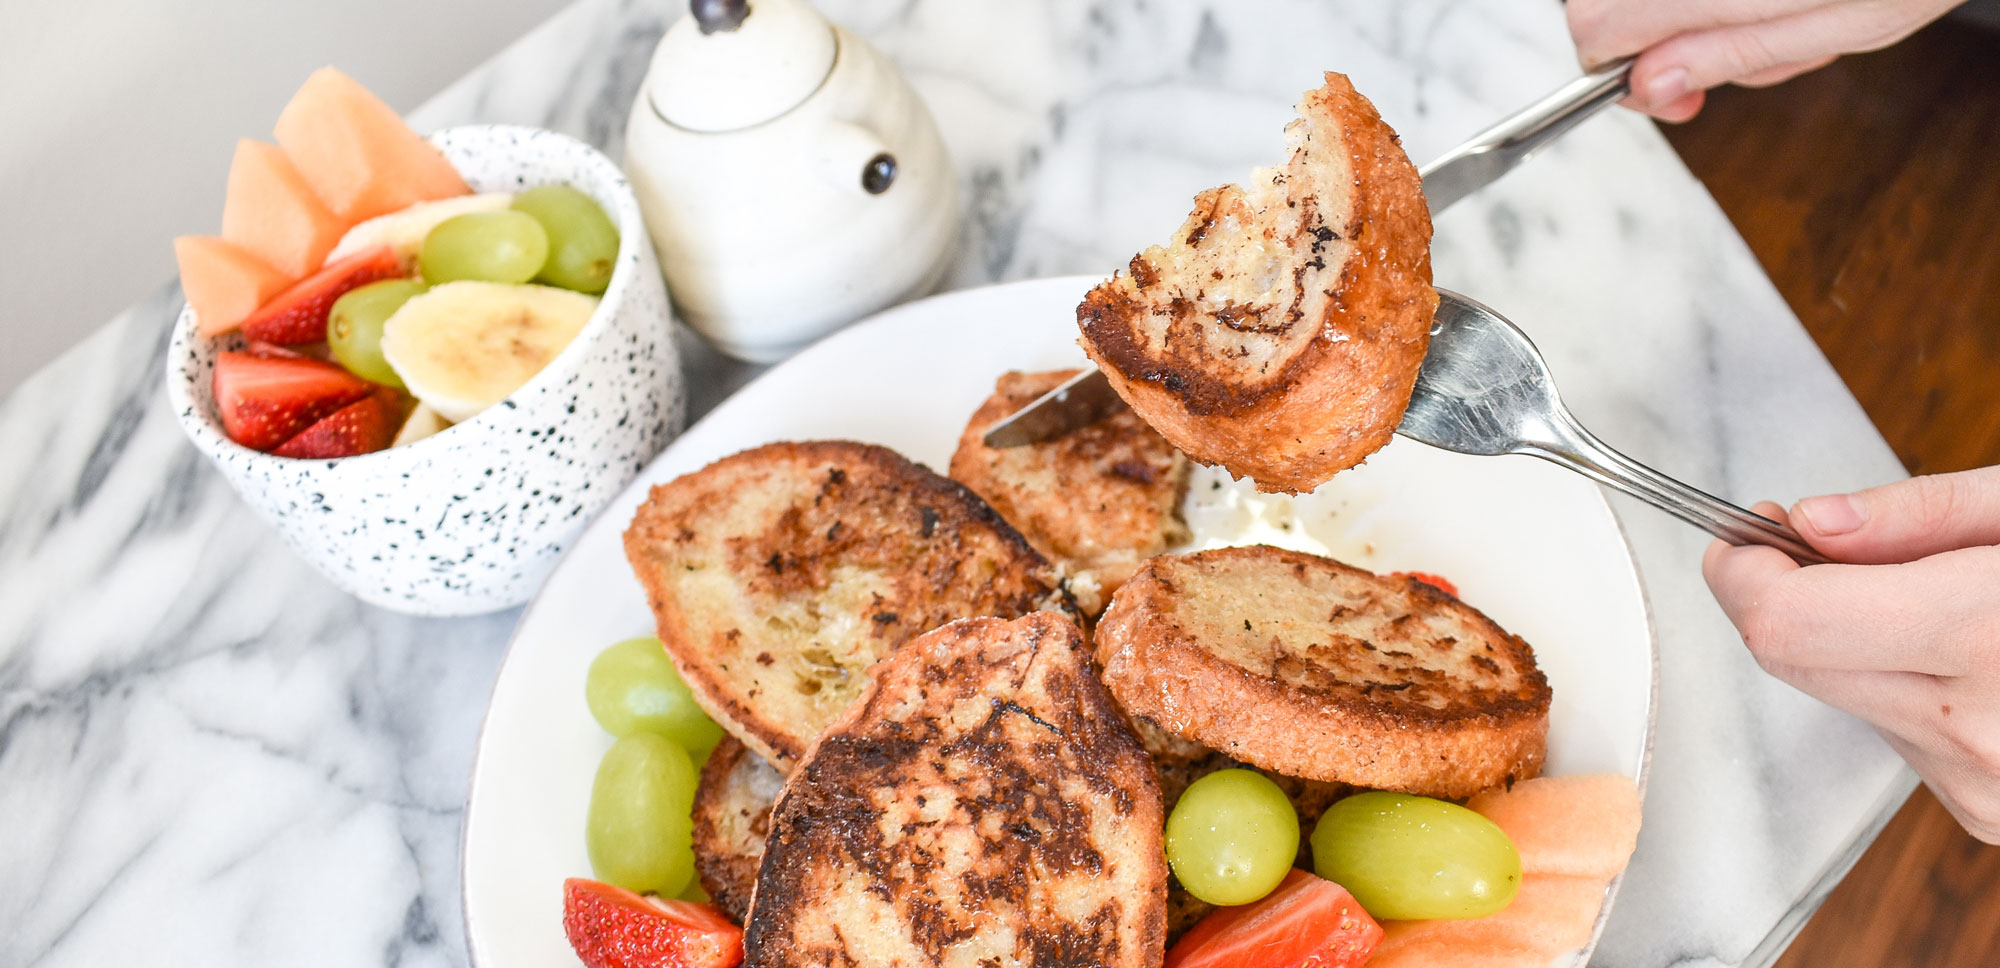 Smile Cafe Dairy and egg free French toast recipe for children with food allergies